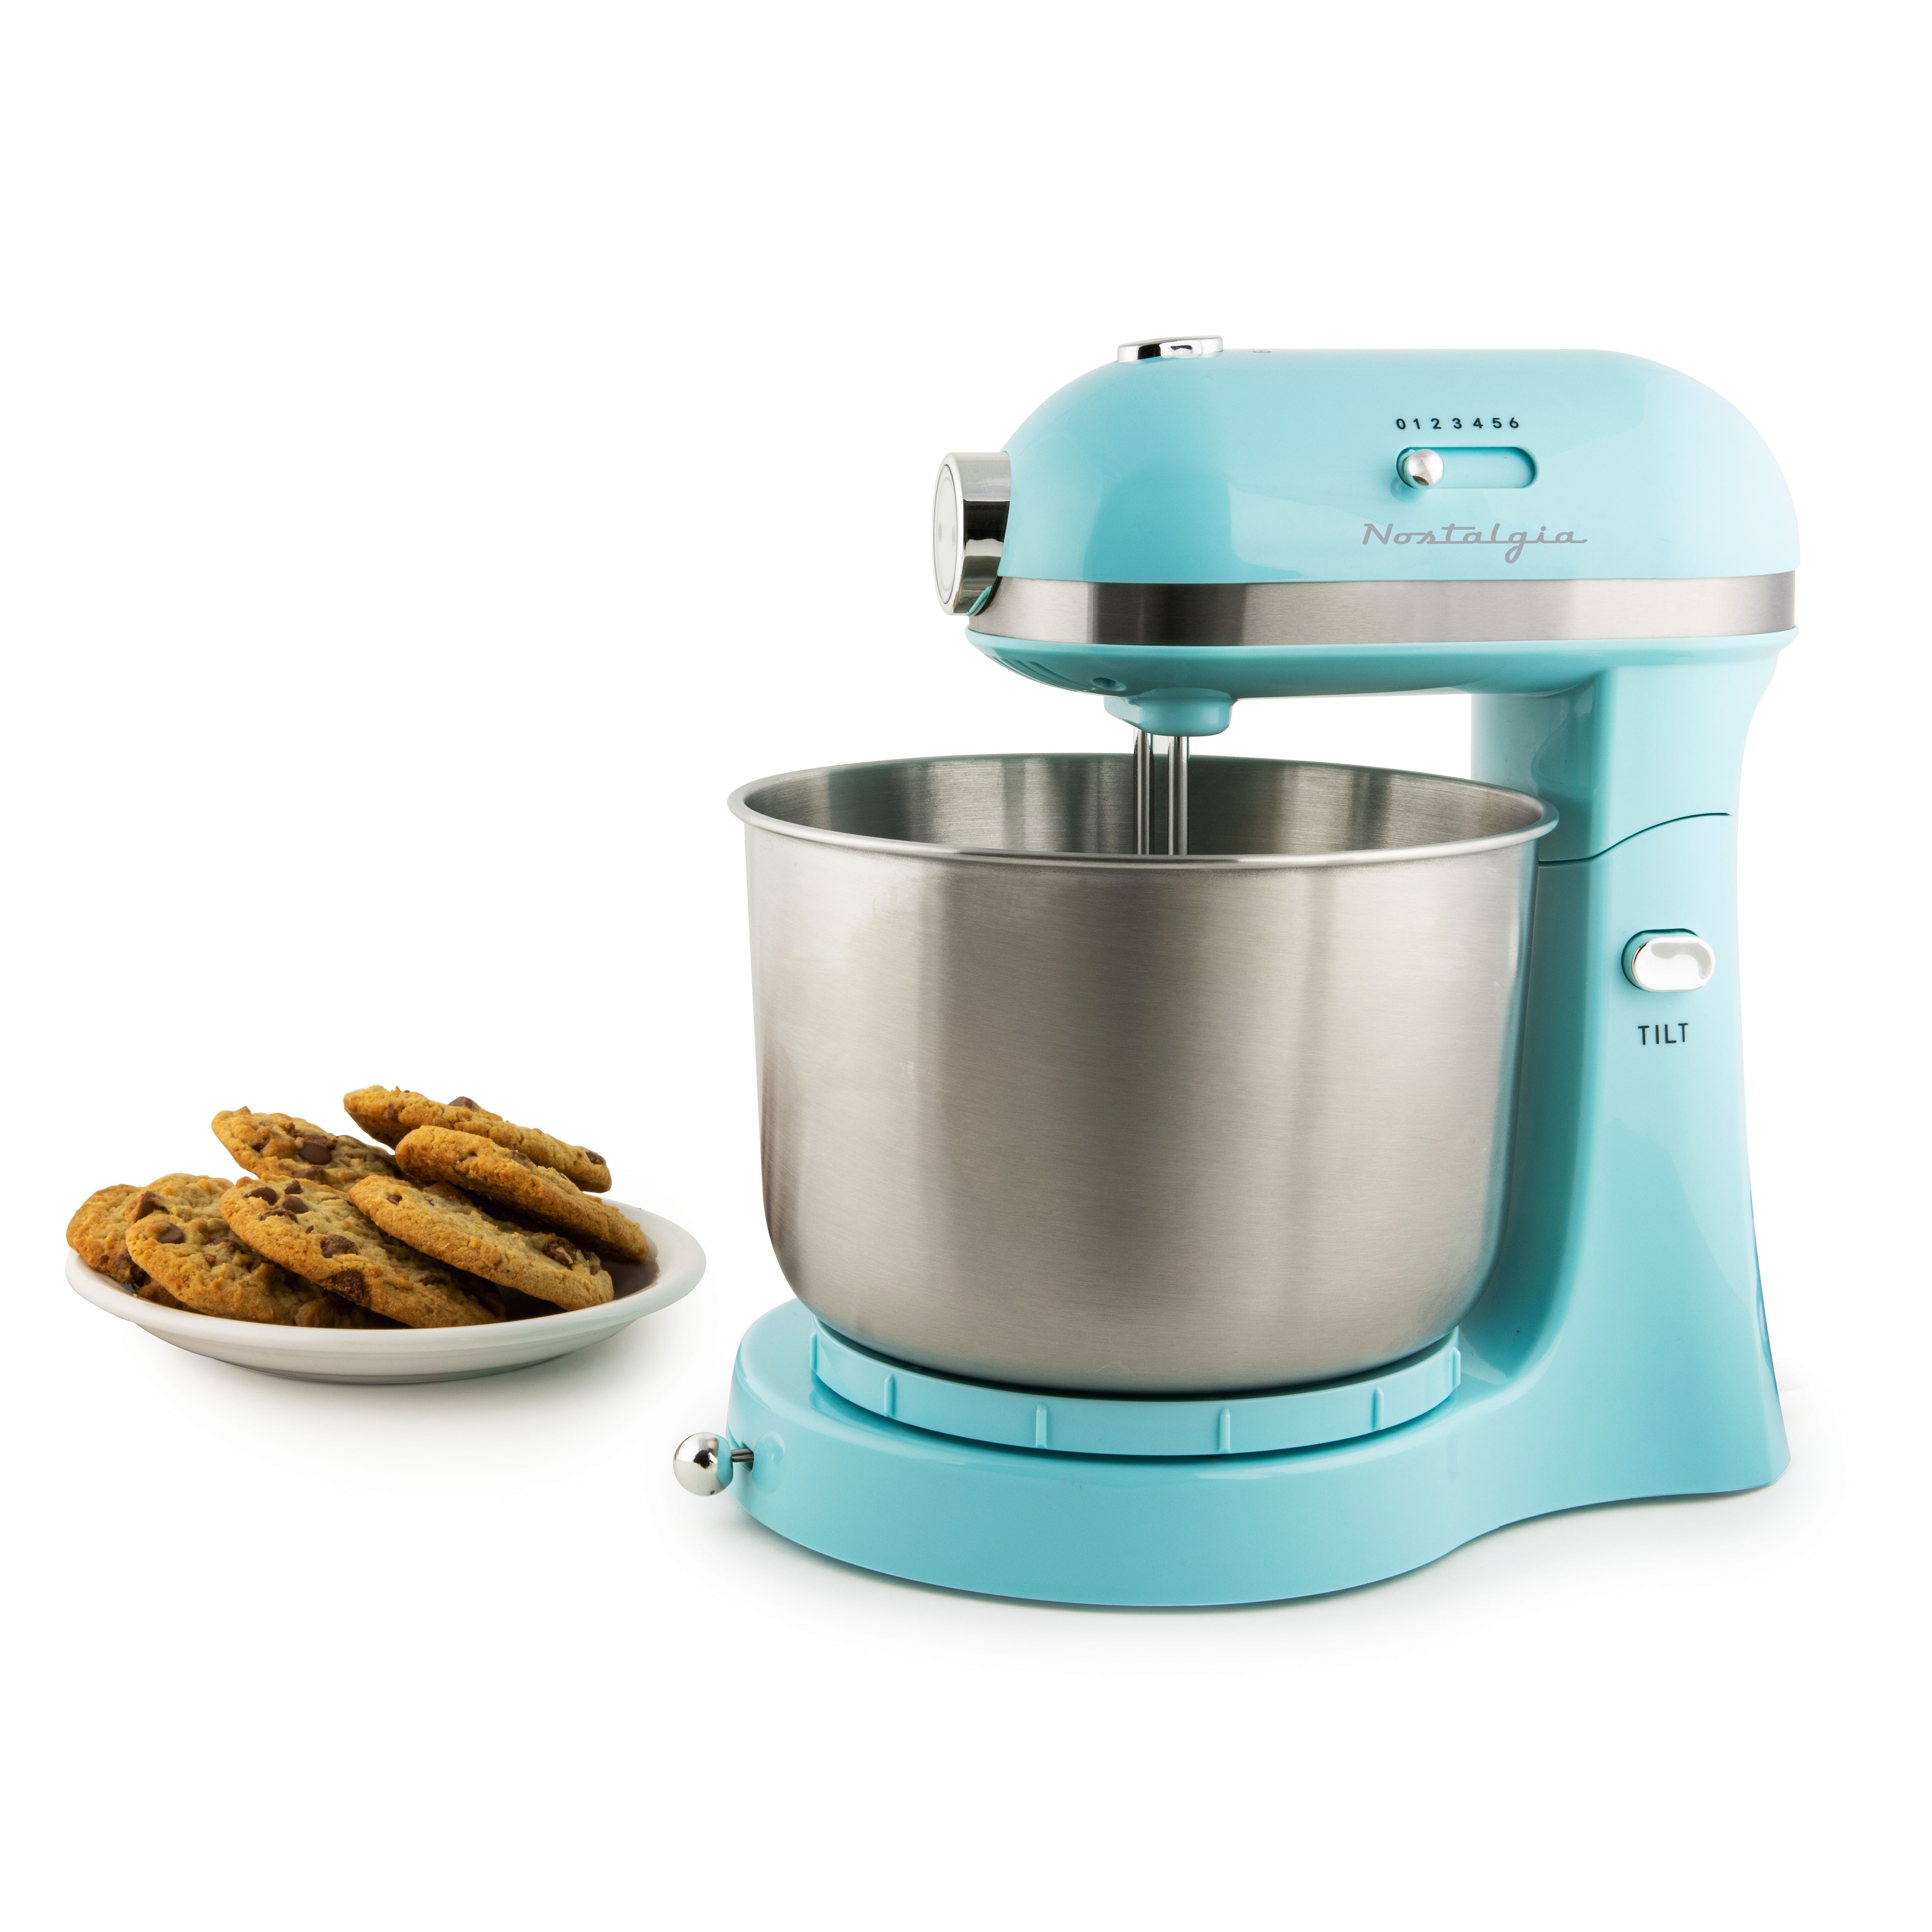 https://ak1.ostkcdn.com/images/products/is/images/direct/853ffe8d7e5aa1e6a3c1695dd4c0e25d3a82cb2b/Nostalgia-3.5-Qt-Stand-Mixer.jpg